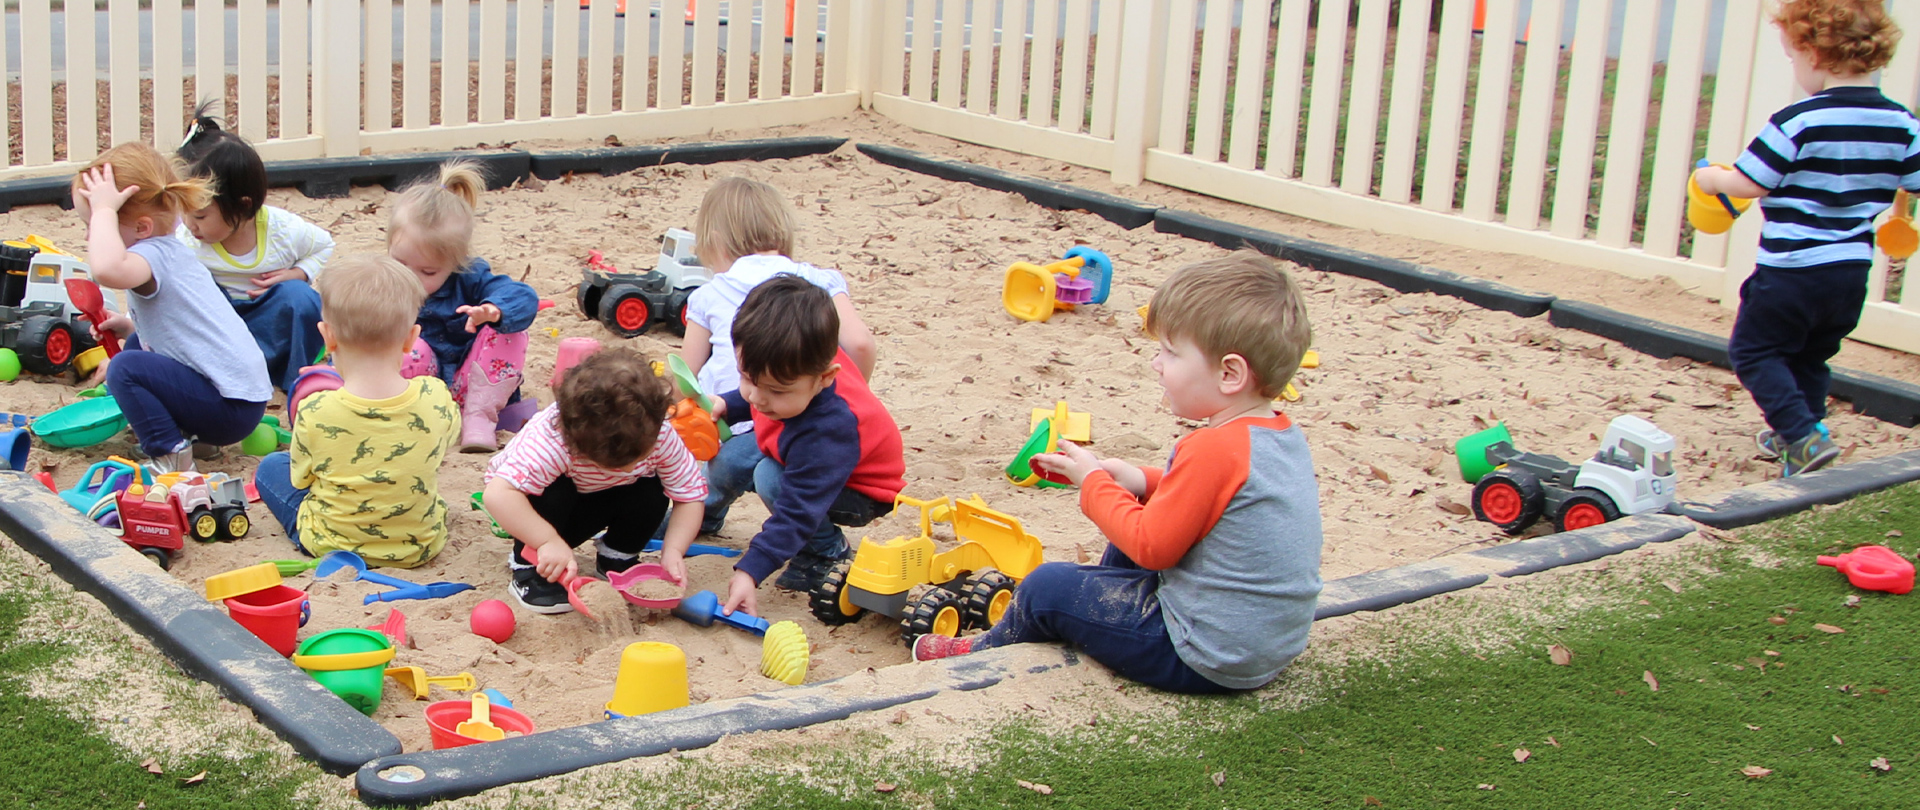 Toddlers
Full Day Preschool
Ages 18–23 months
